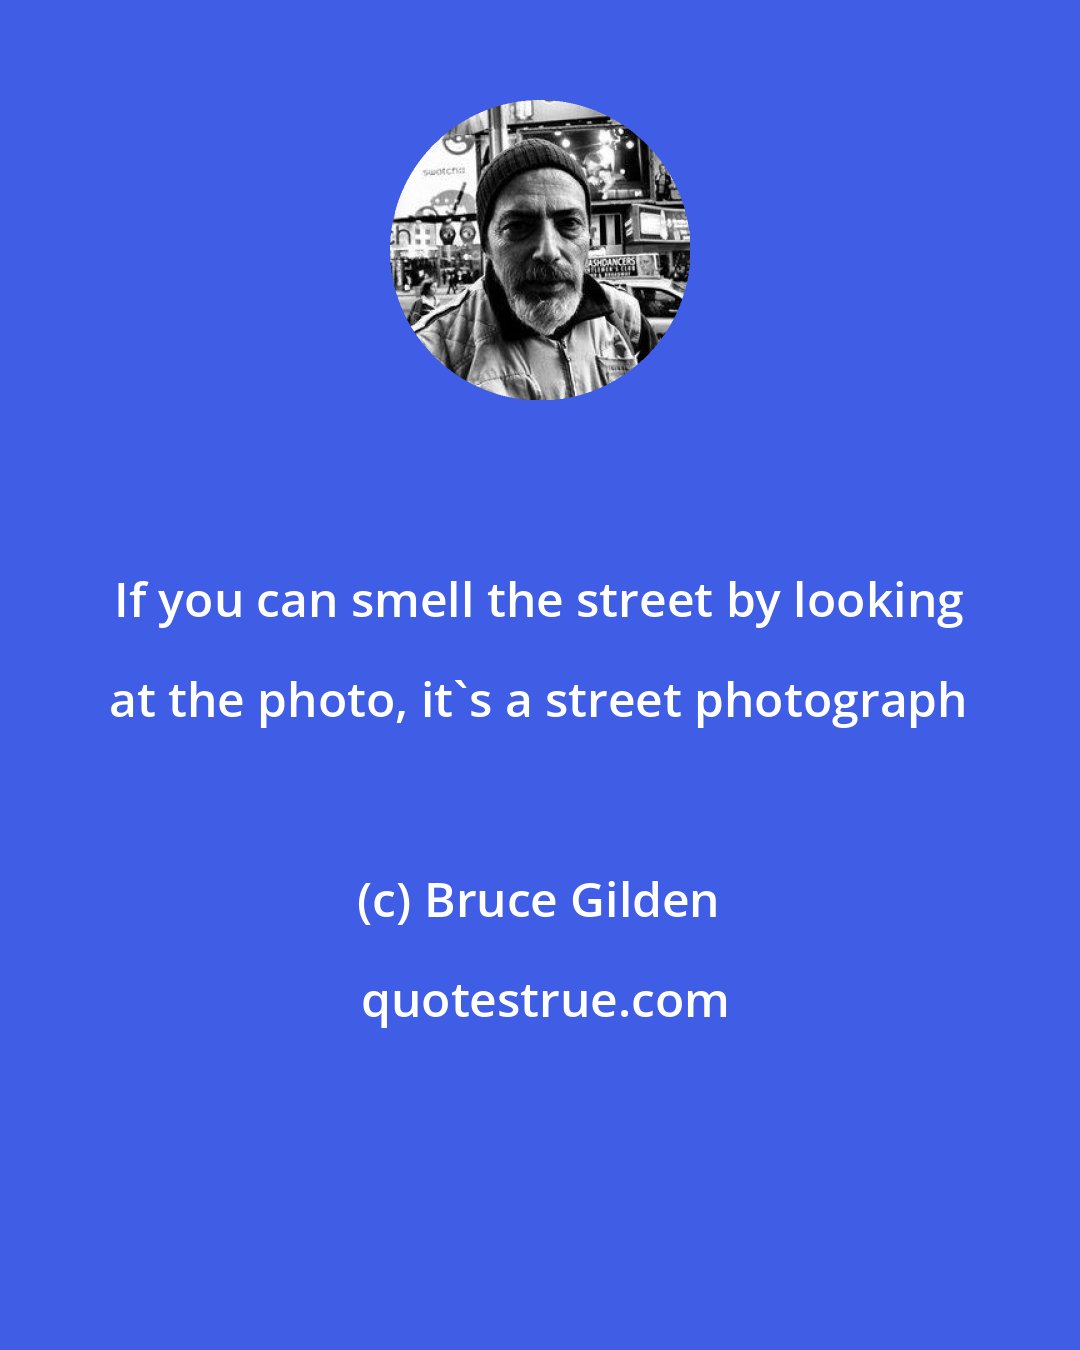 Bruce Gilden: If you can smell the street by looking at the photo, it's a street photograph